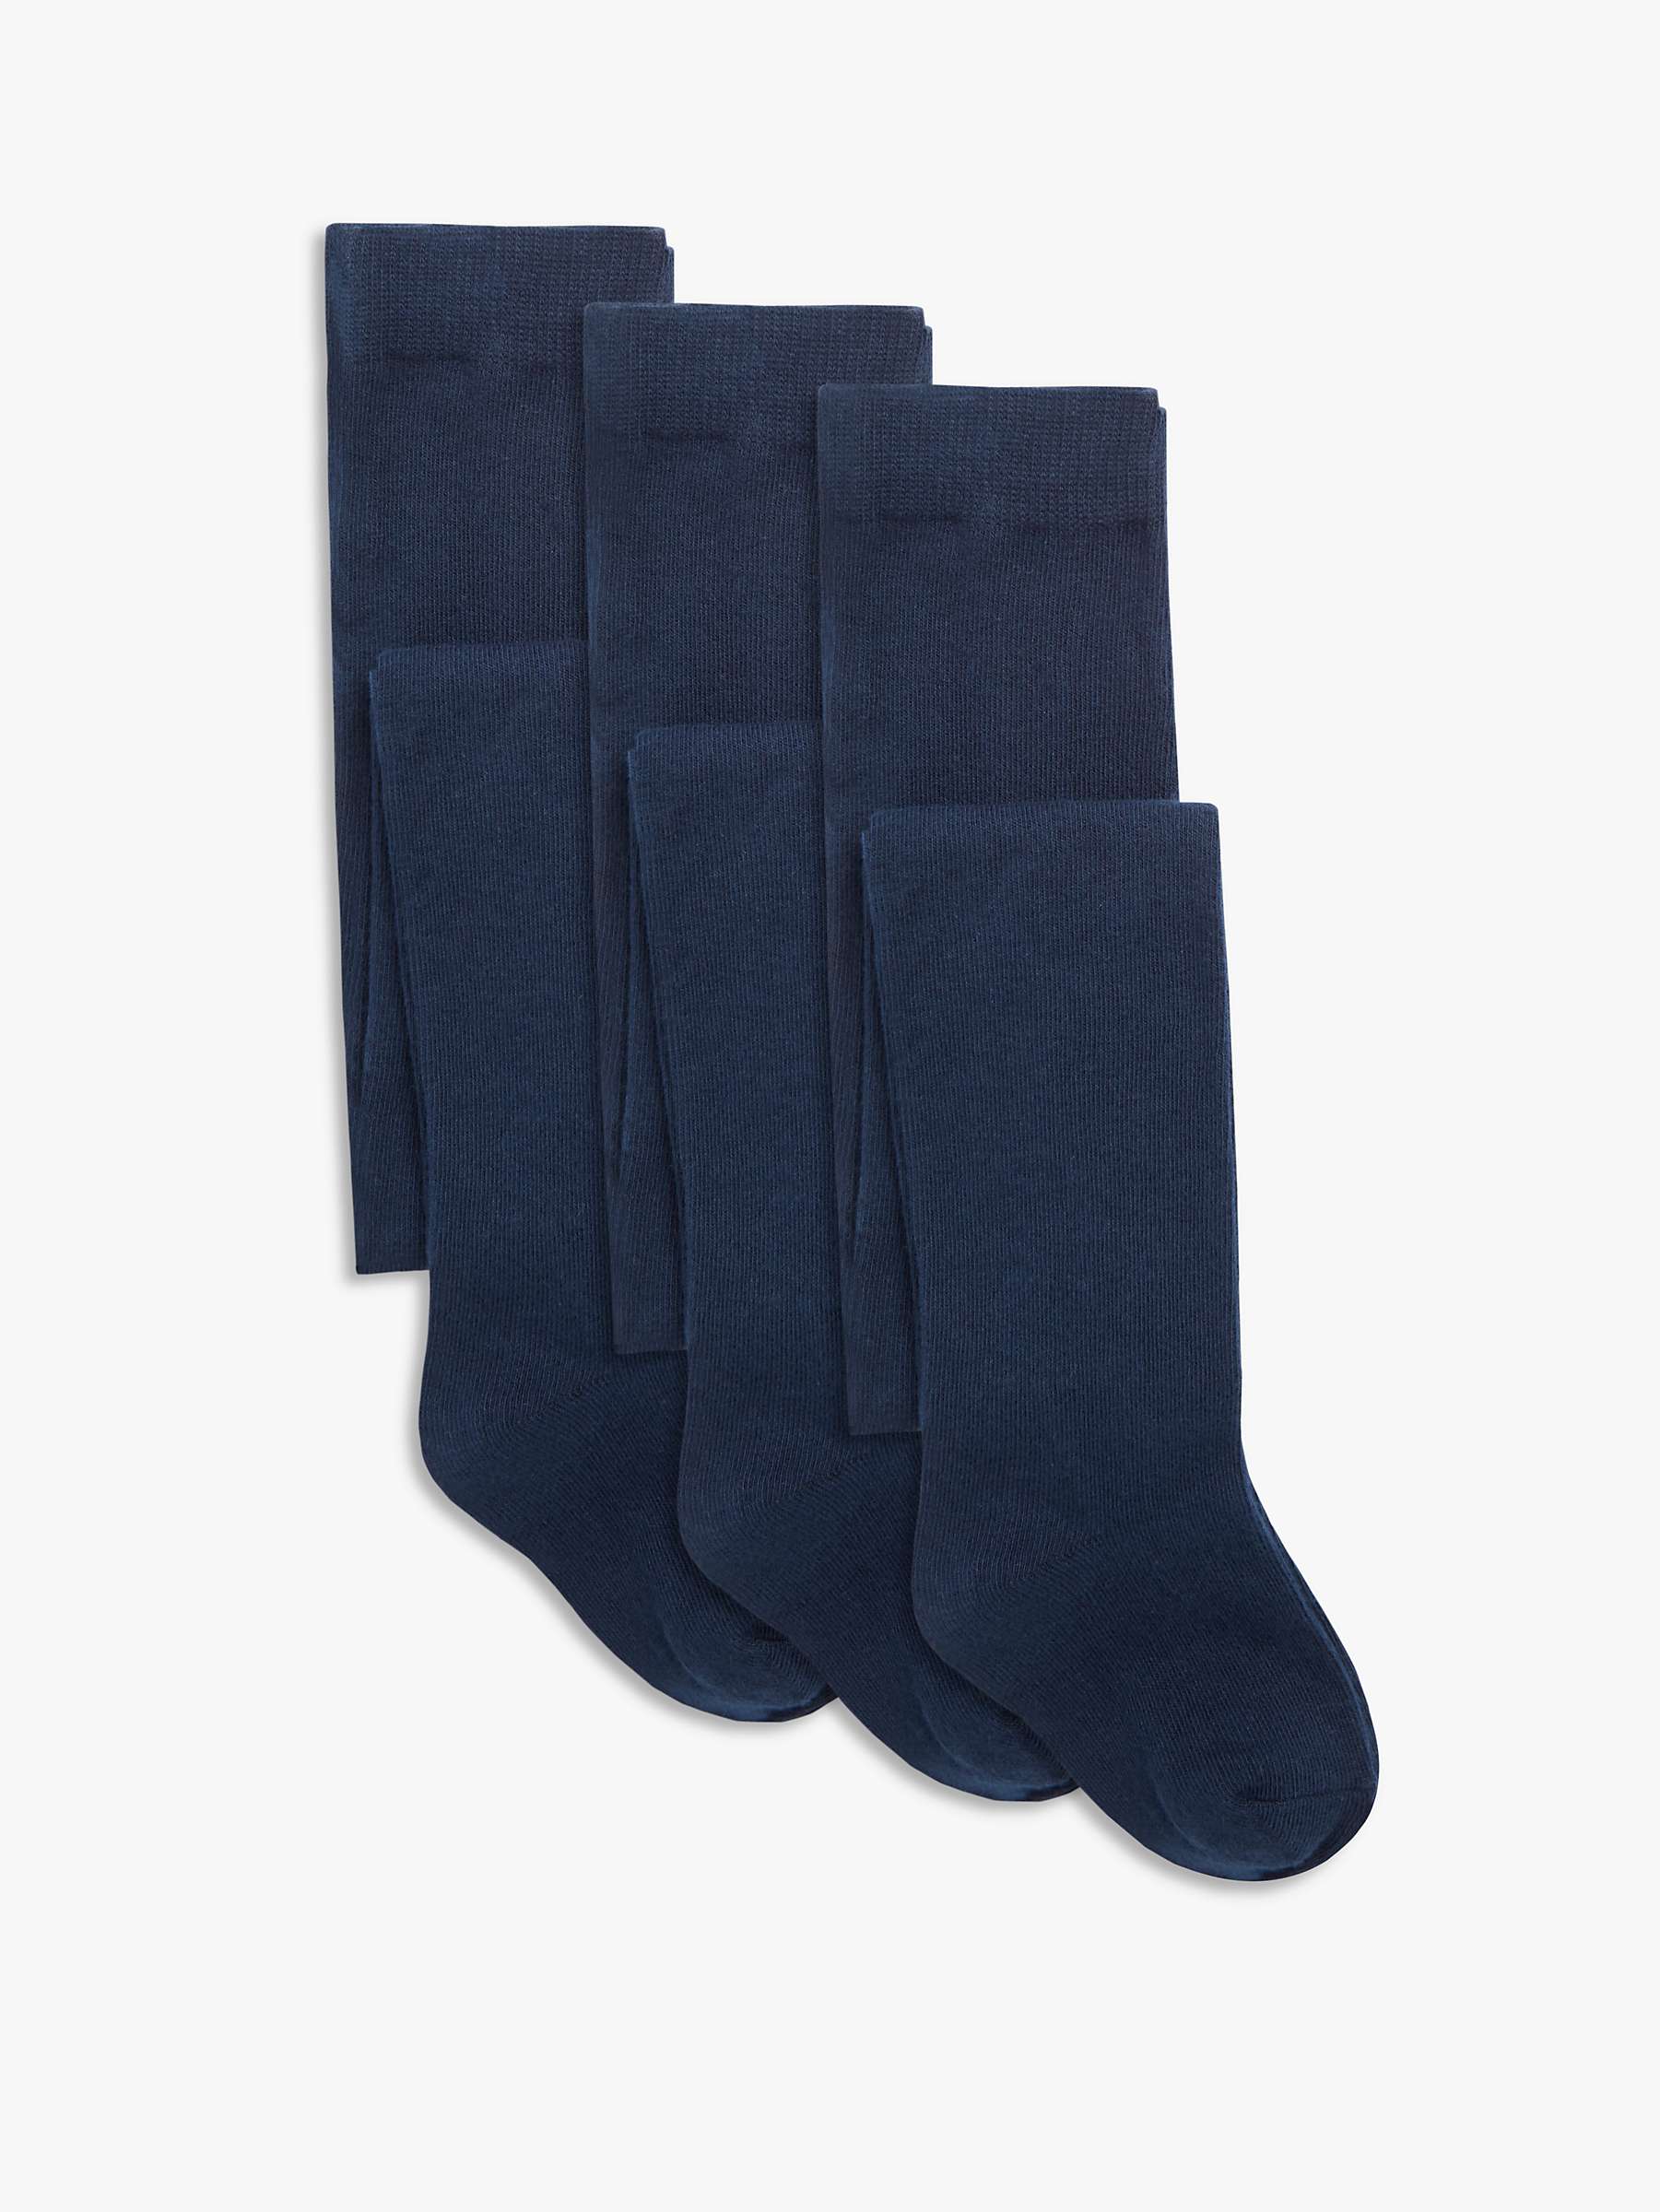 Buy John Lewis ANYDAY Kids' Cotton Rich Tights, Pack of 3, Blue Online at johnlewis.com